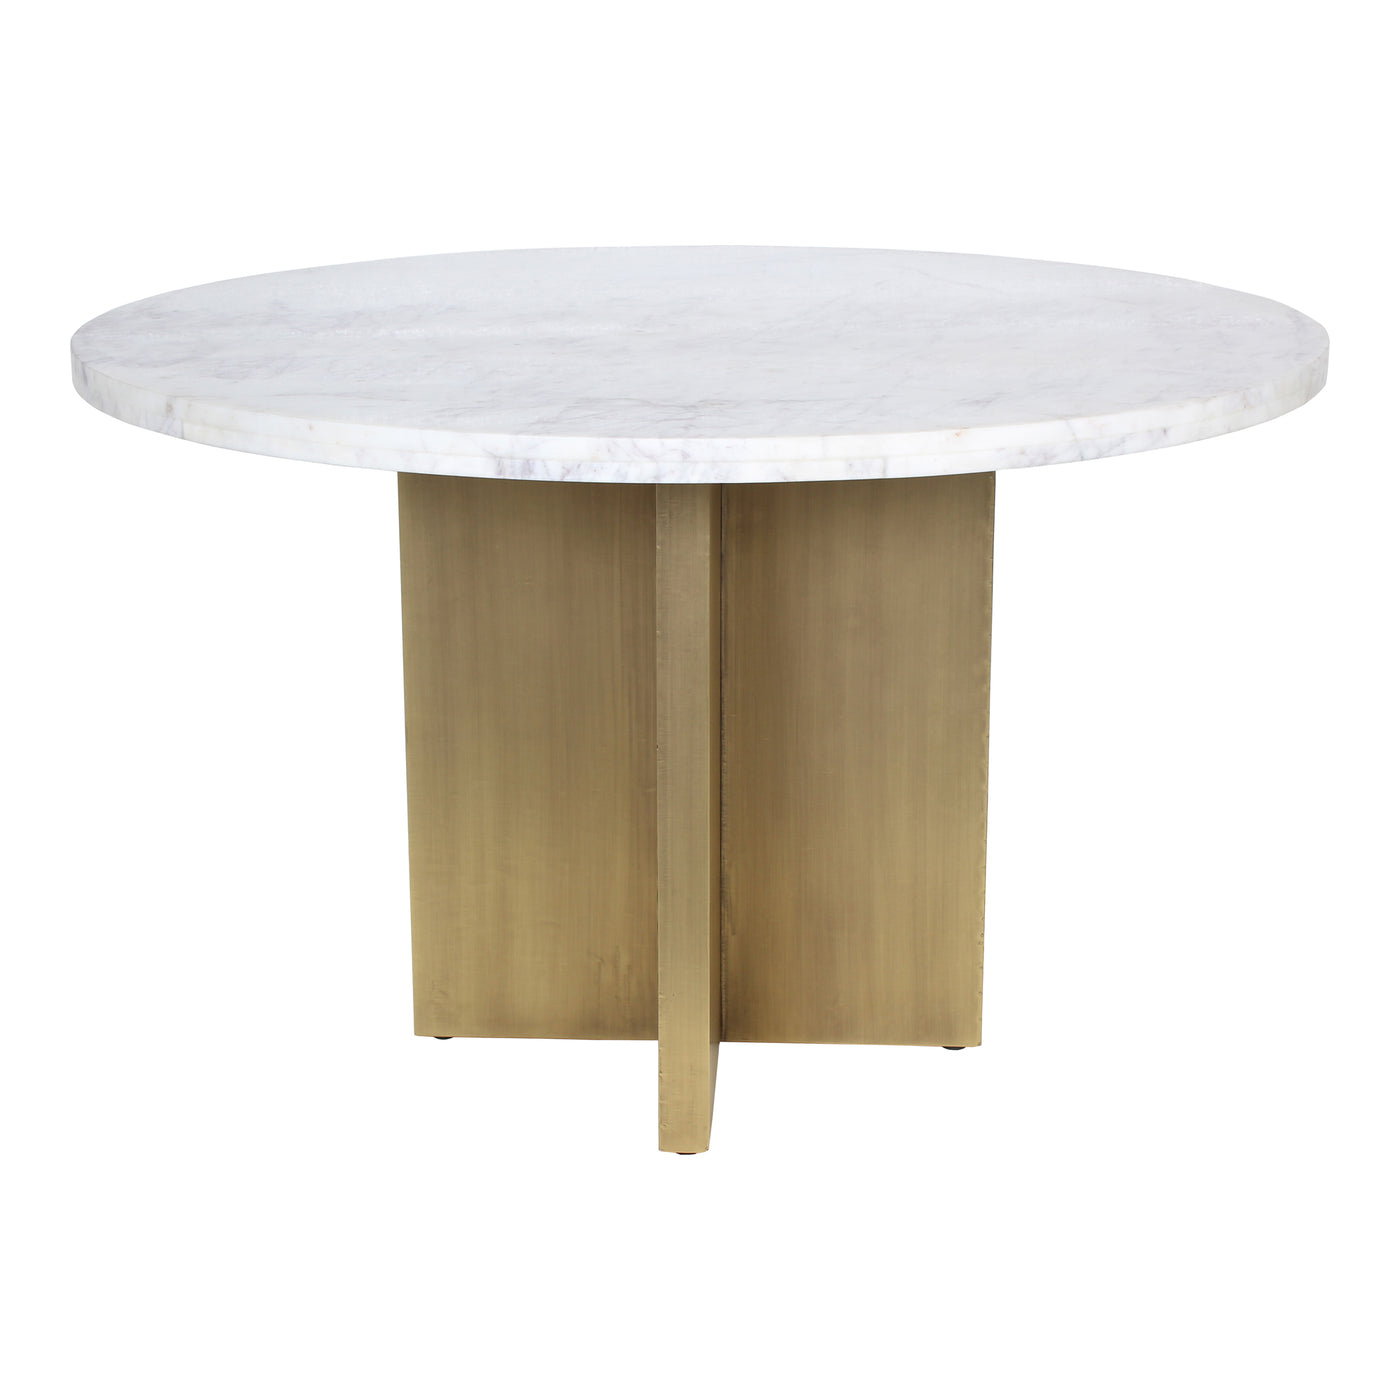 Grace your dining room with the remarkable and contemporary style of the Graze dining table. The sleek white marble top an...